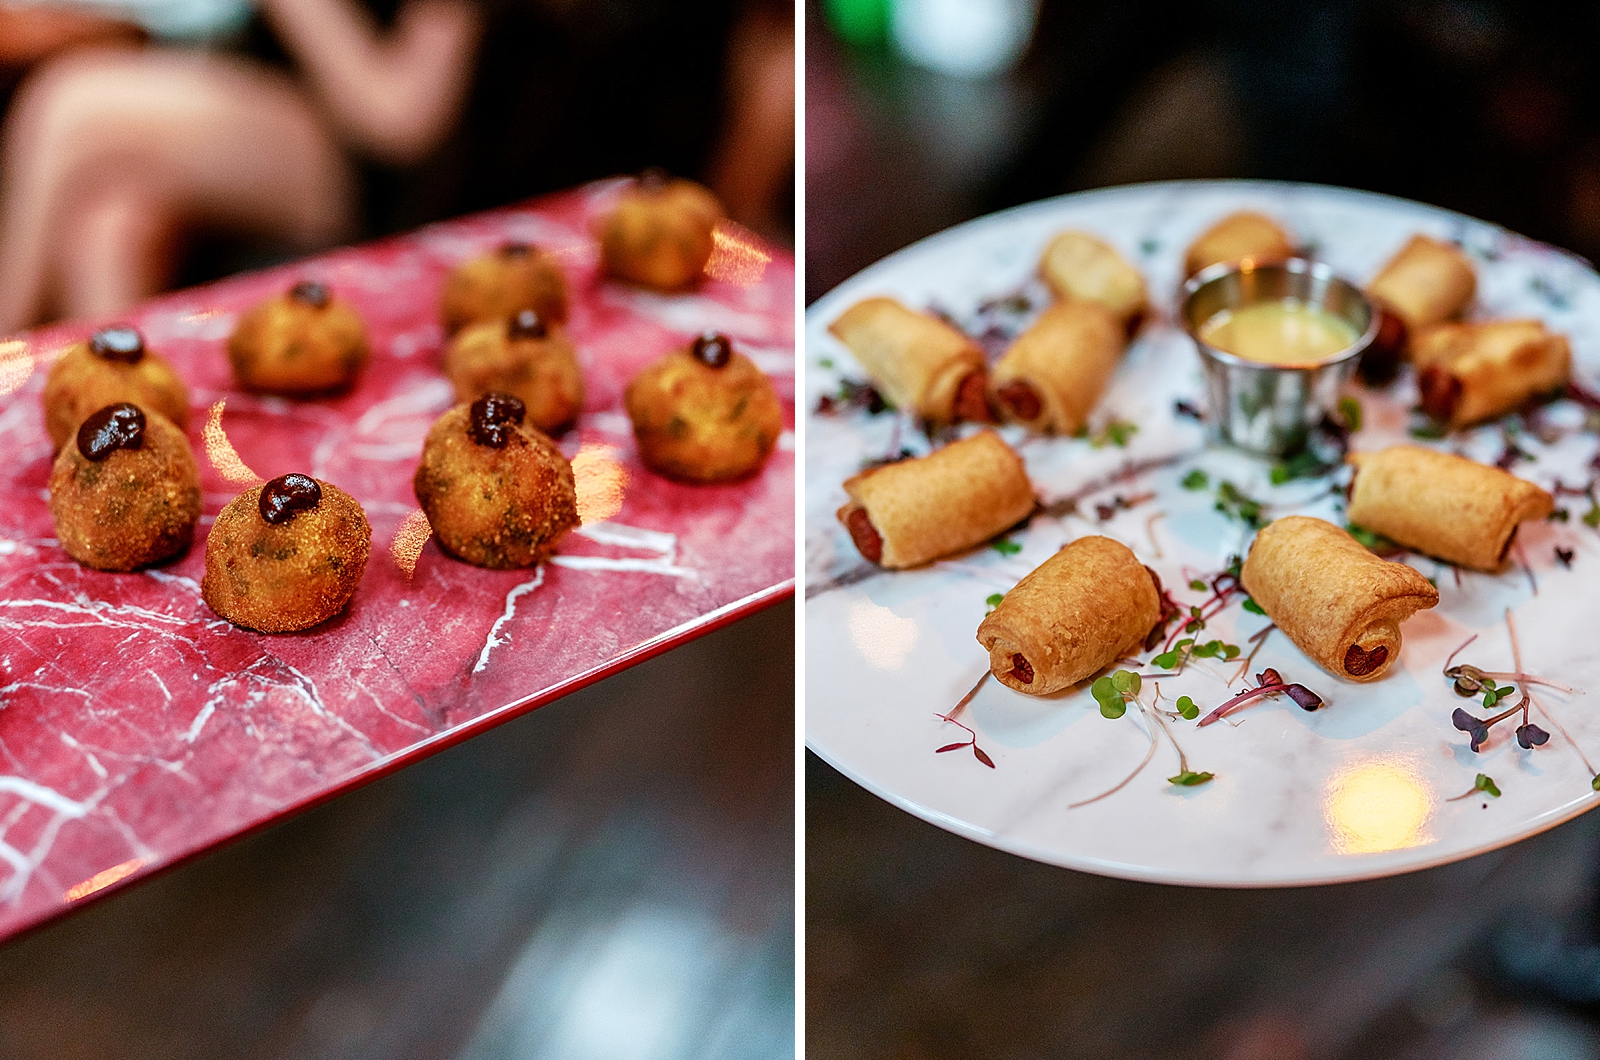 Left photo: Up close shot of hors d'oeuvres being presented on a tray. 
Right photo: Up close shot of pigs in a blanket being presented on a tray.  